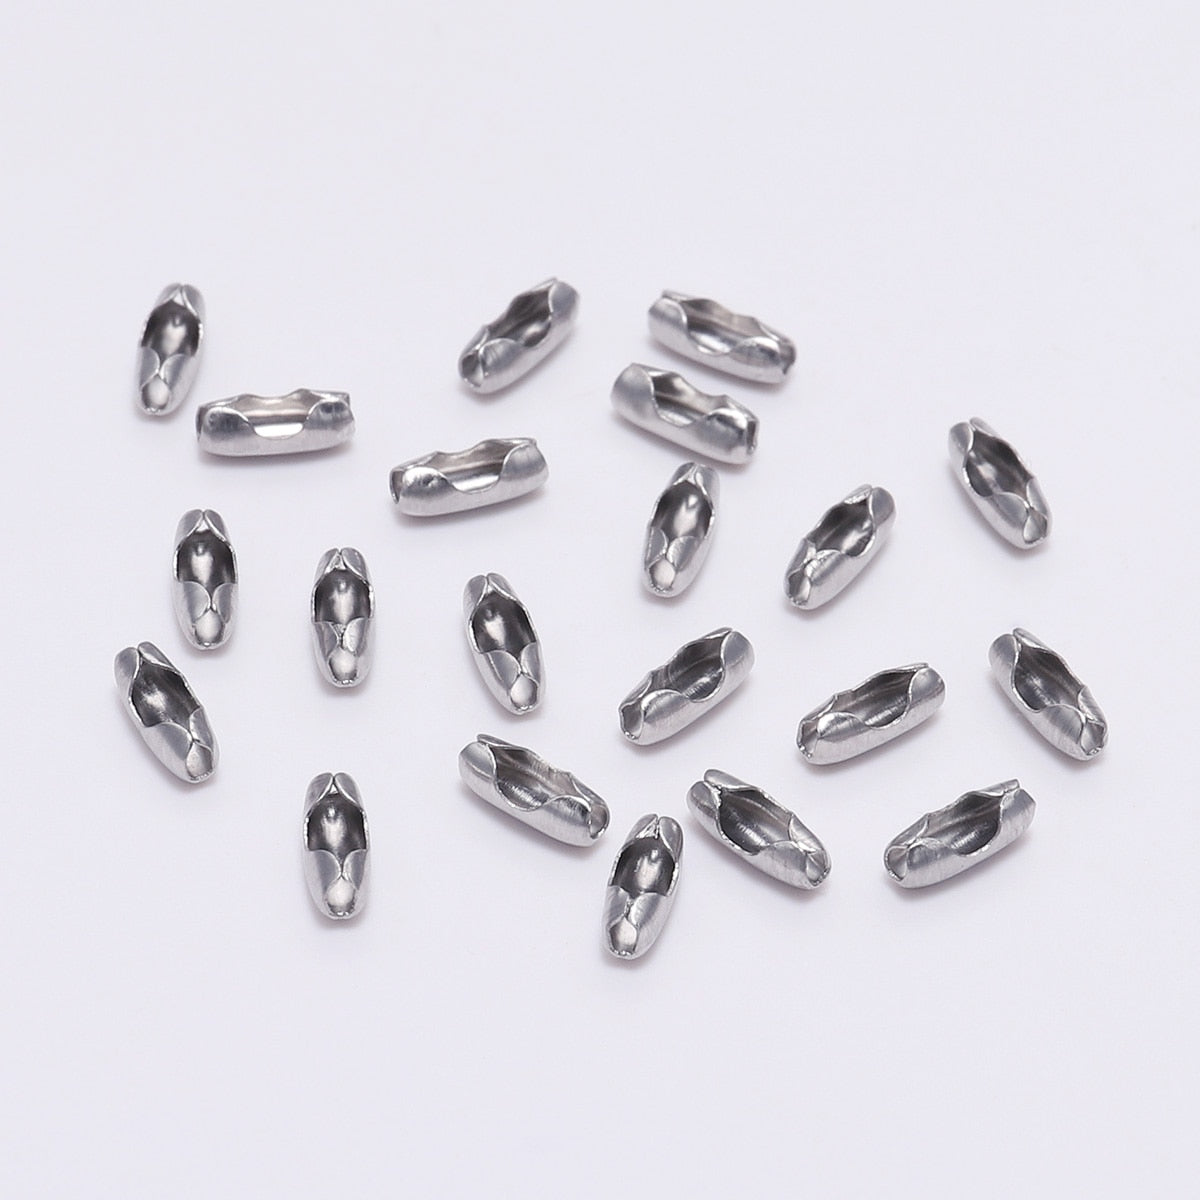 Stainless Steel Ball Chain Connector Clasps 1.5-3.2mm, 50pcs